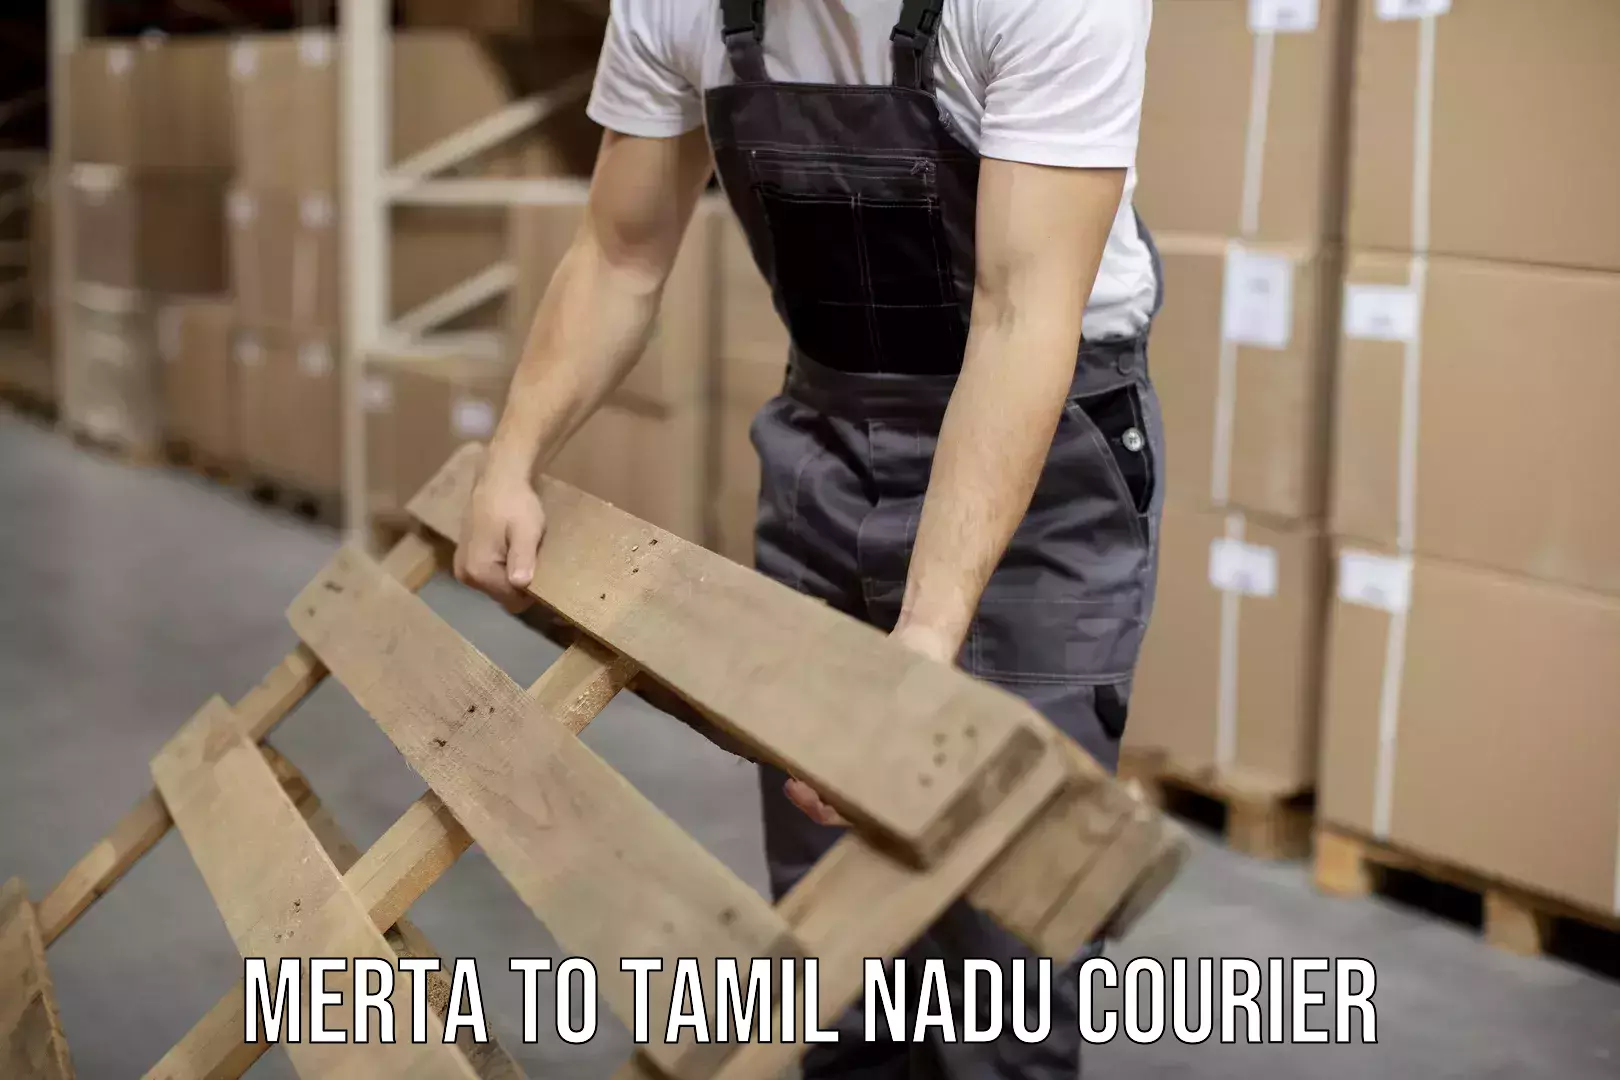 Nationwide courier service Merta to Tamil Nadu